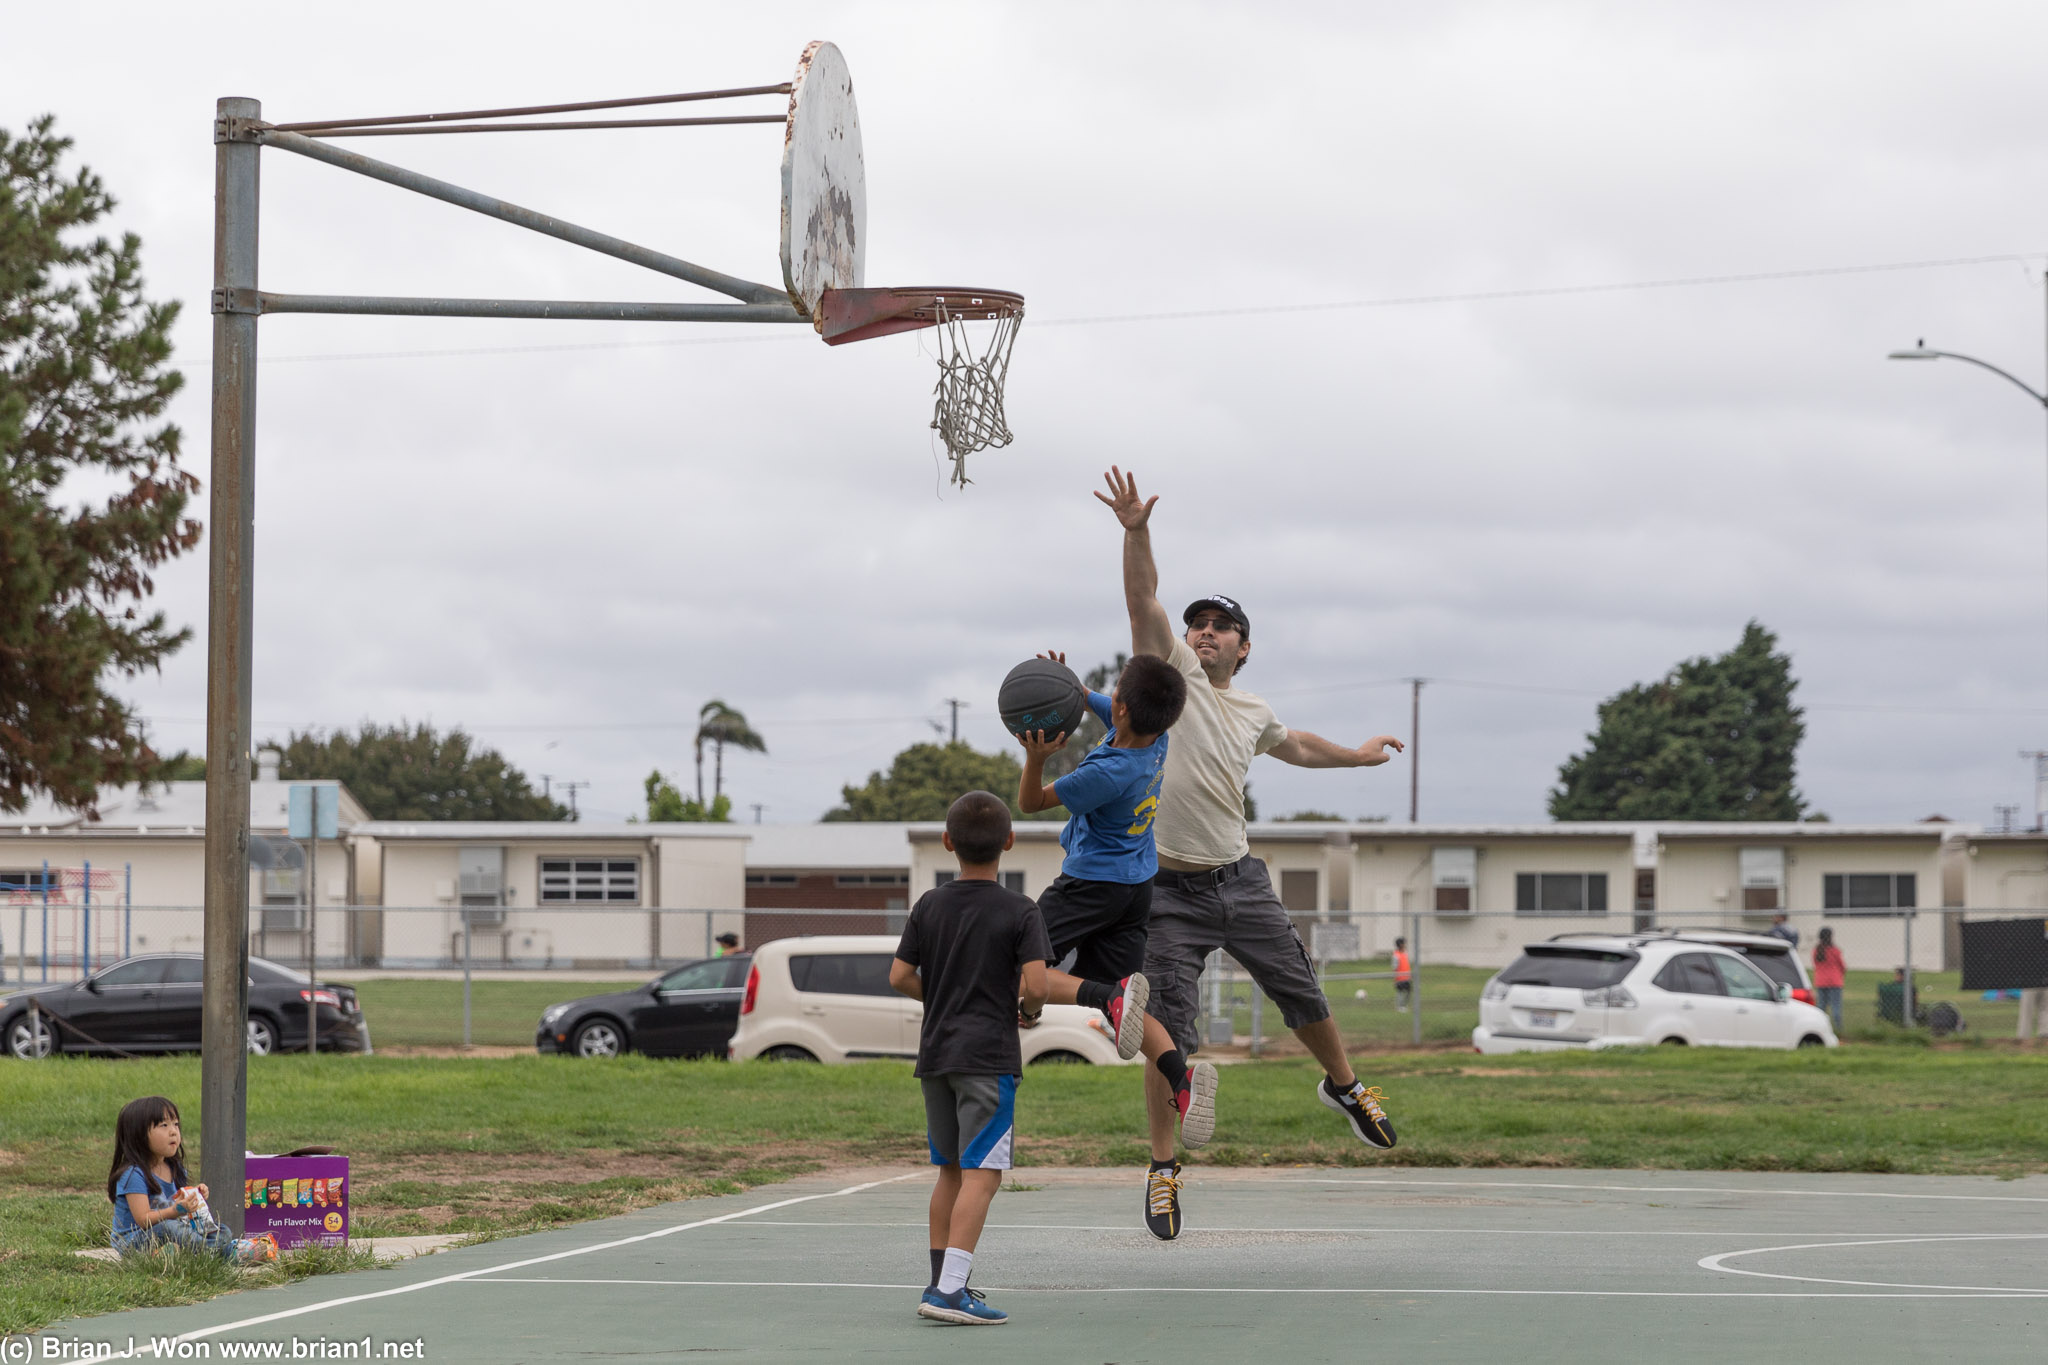 The younger generation also loves to school their elders on the basketball court.